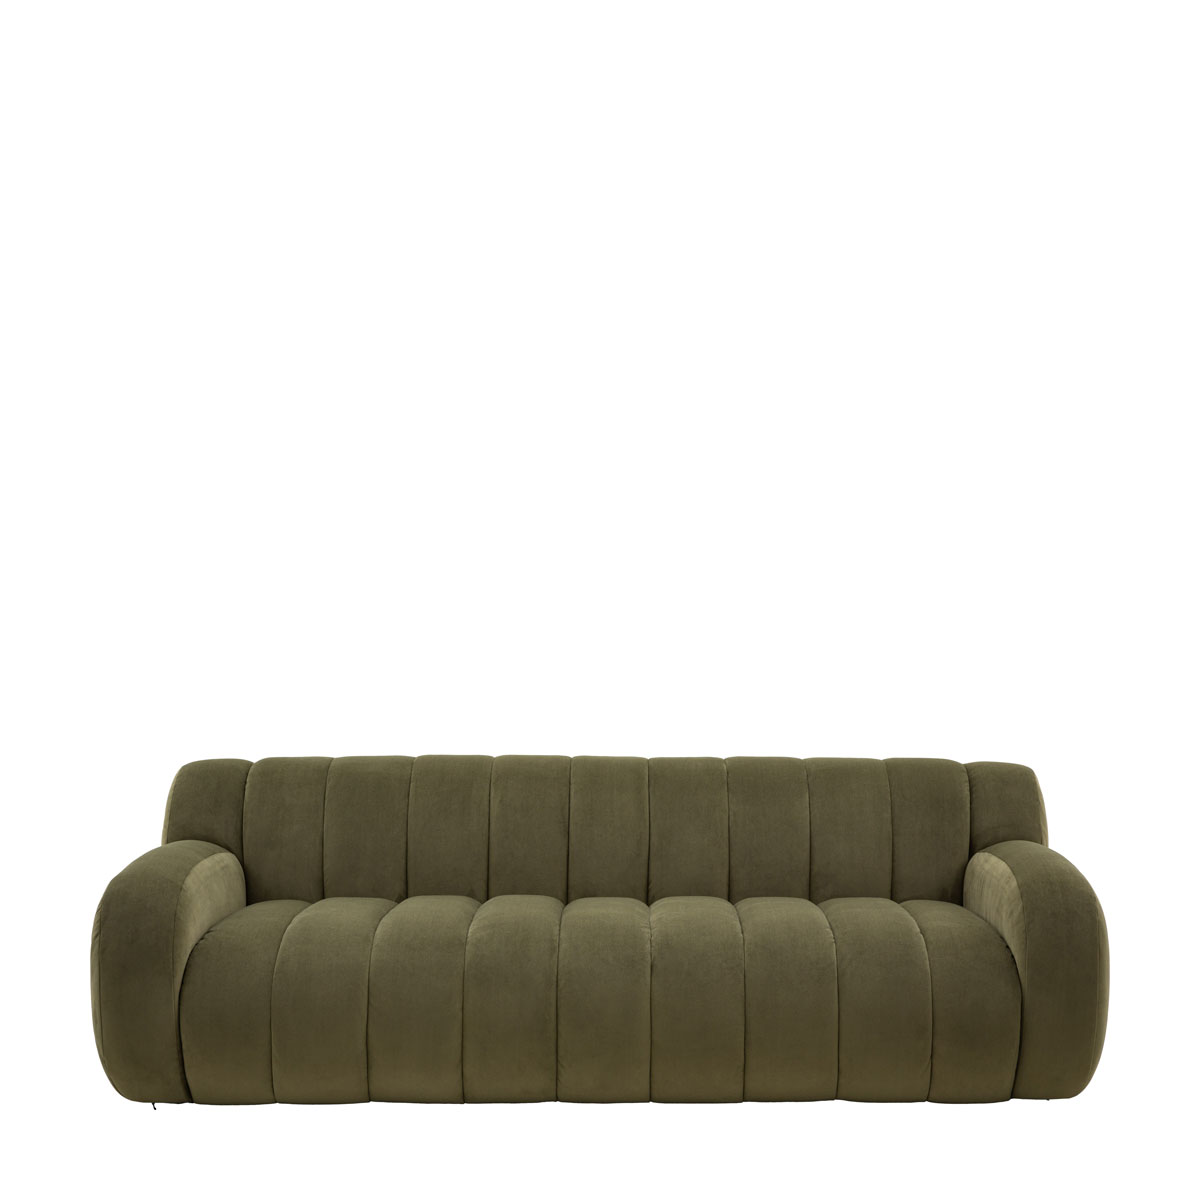 Coste 3 Seater Sofa Moss 2230x1120x740mm